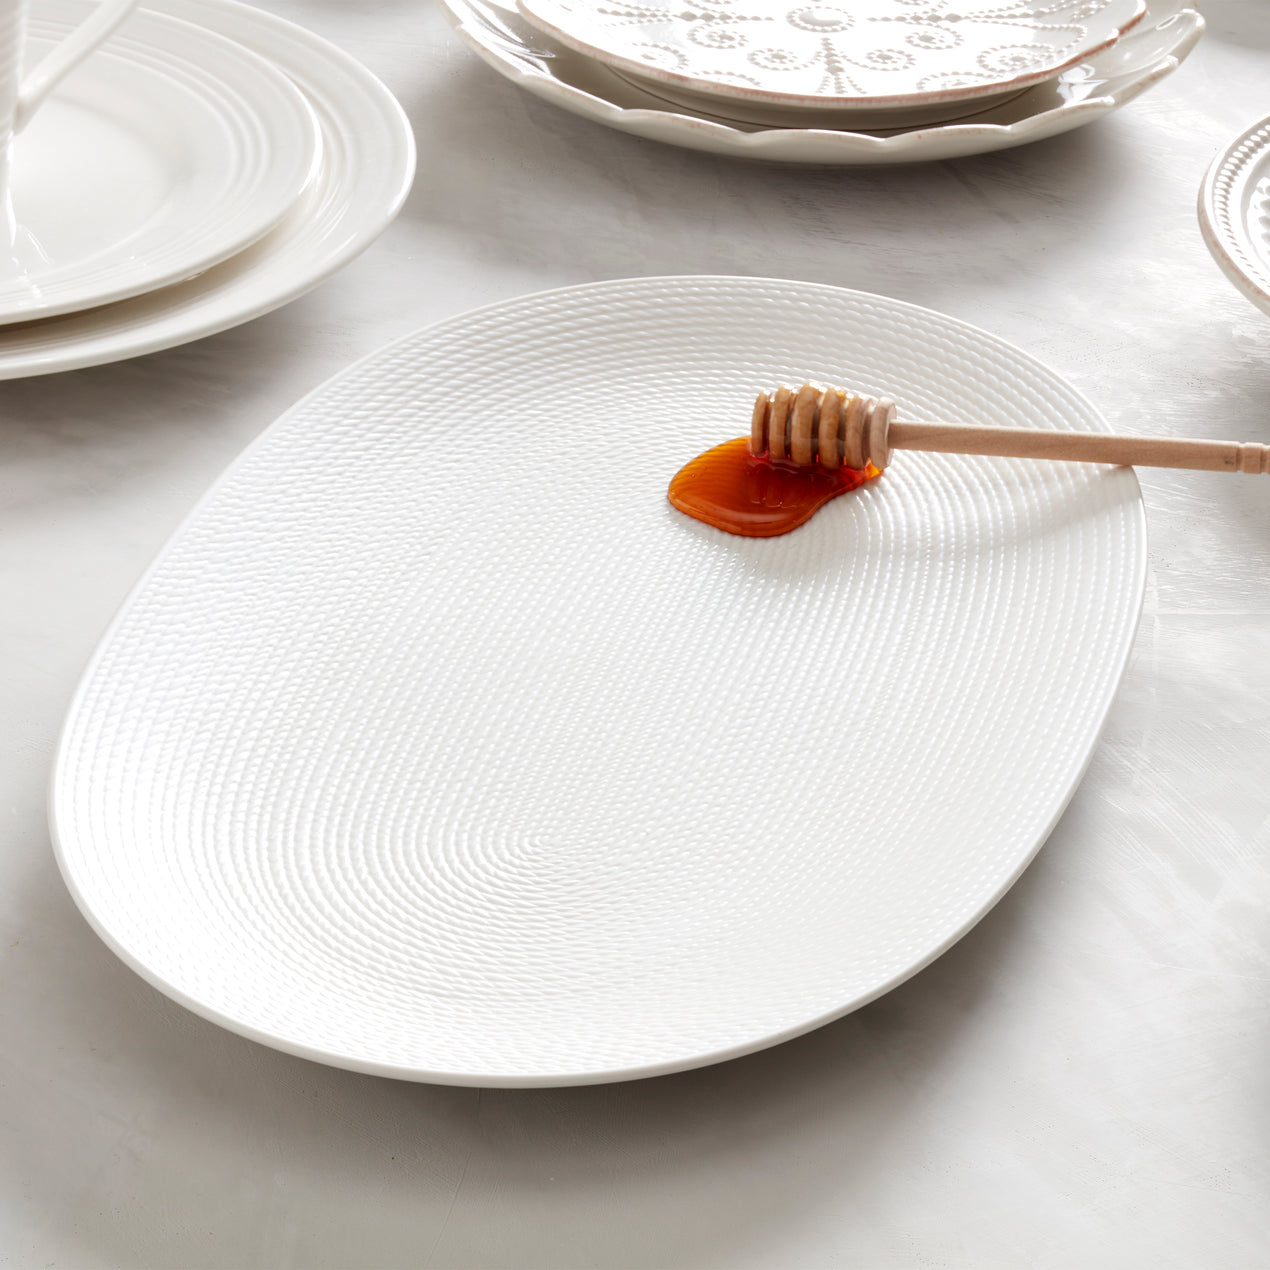 White Oval Plates